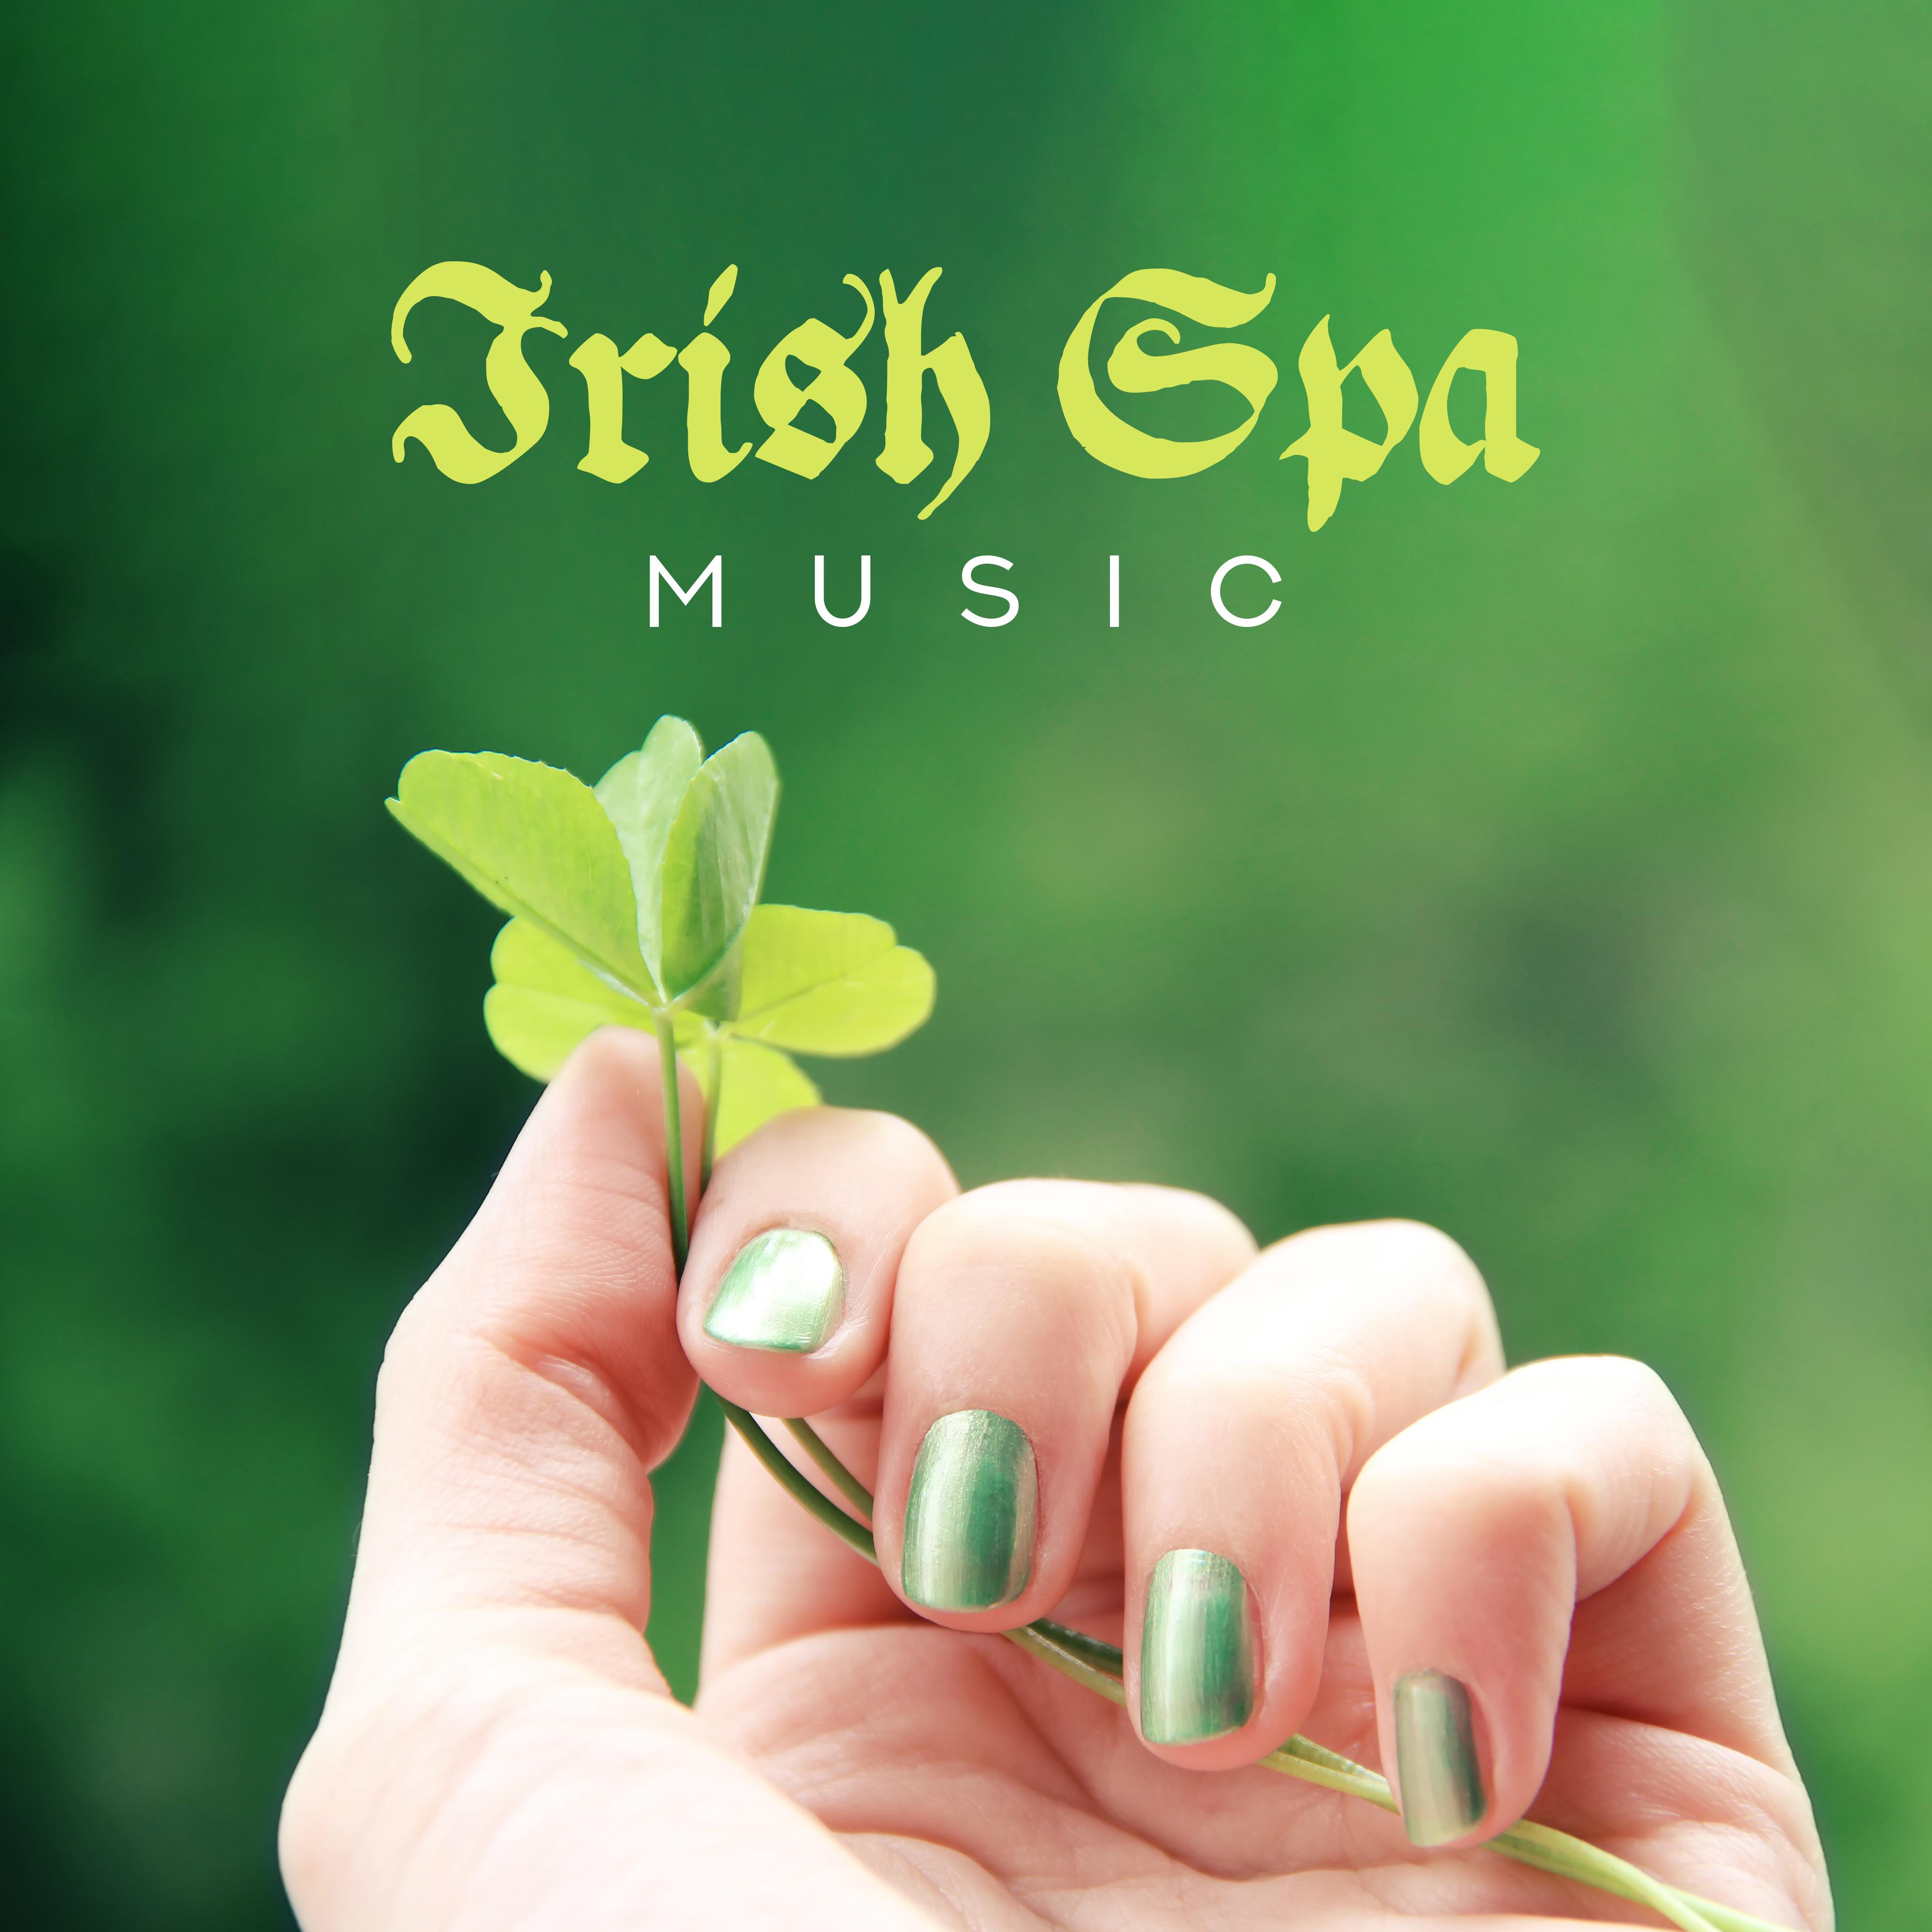 Irish Spa Music - Top 15 Tracks for Spa Treatments (Massage, Sauna, Rejuvenating, Cosmetic and Regenerating Treatments, Baths, Therapies, Rehabilitation and Relaxation)